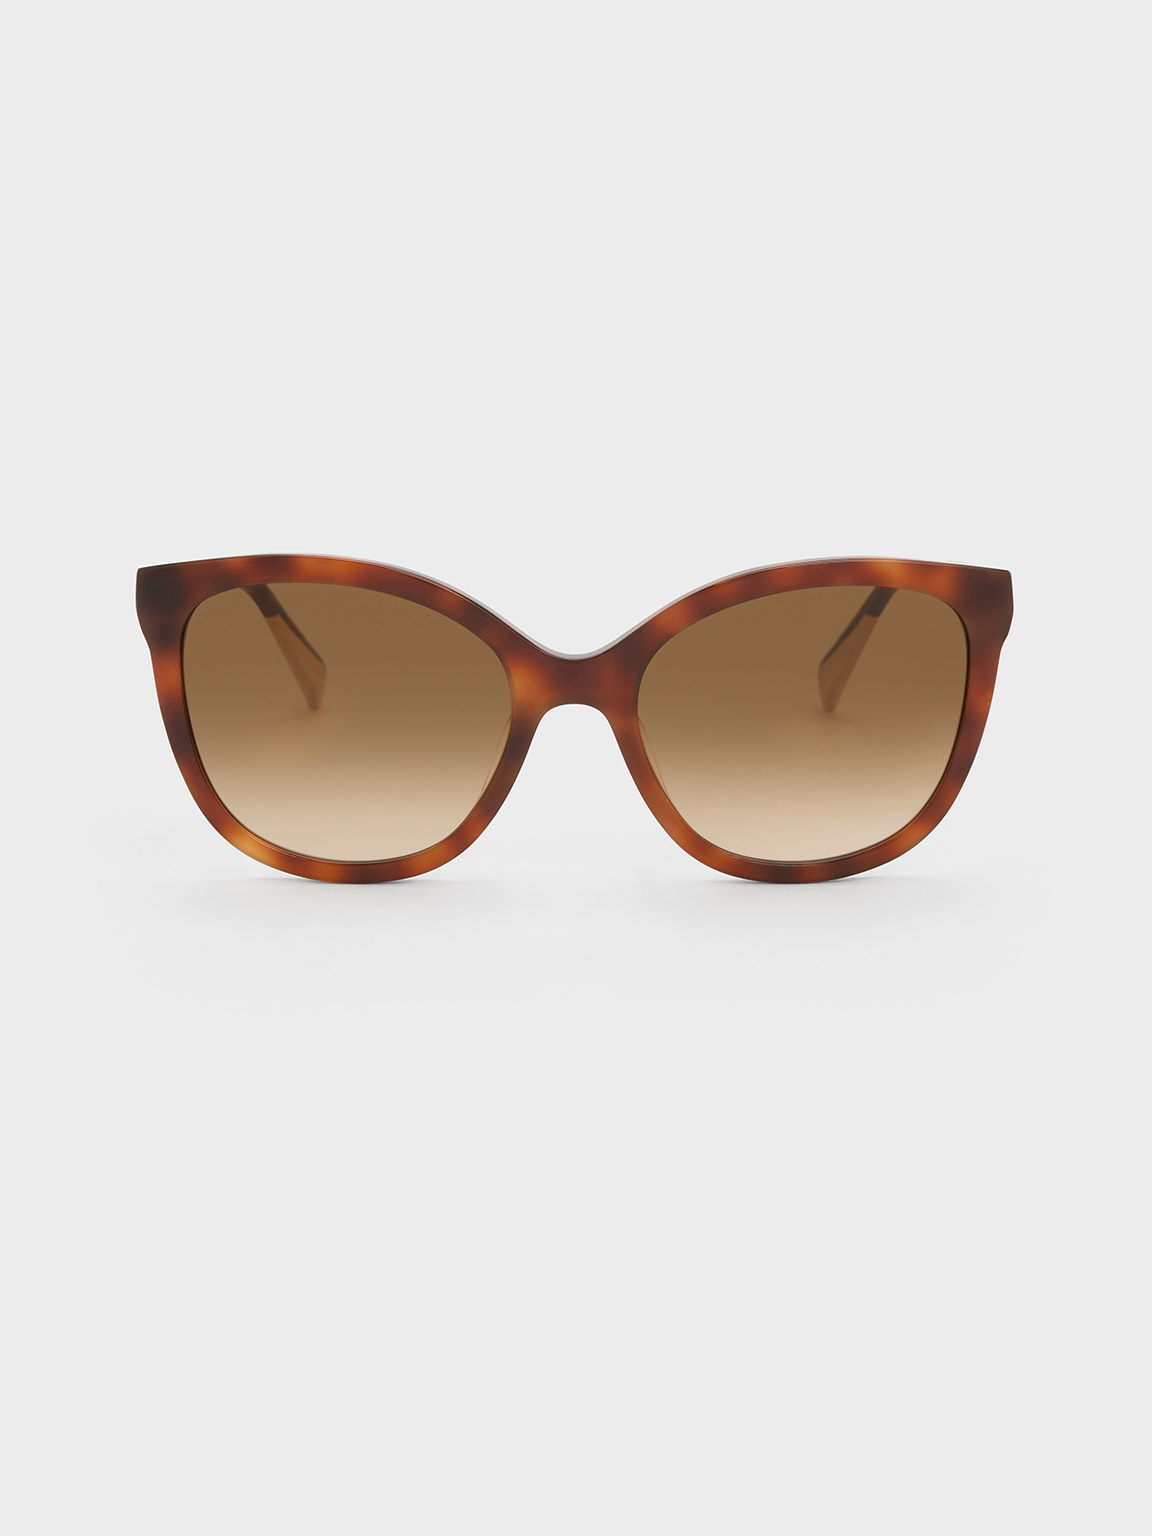 Charles & Keith Tortoiseshell Recycled Acetate Oval Sunglasses In T. Shell